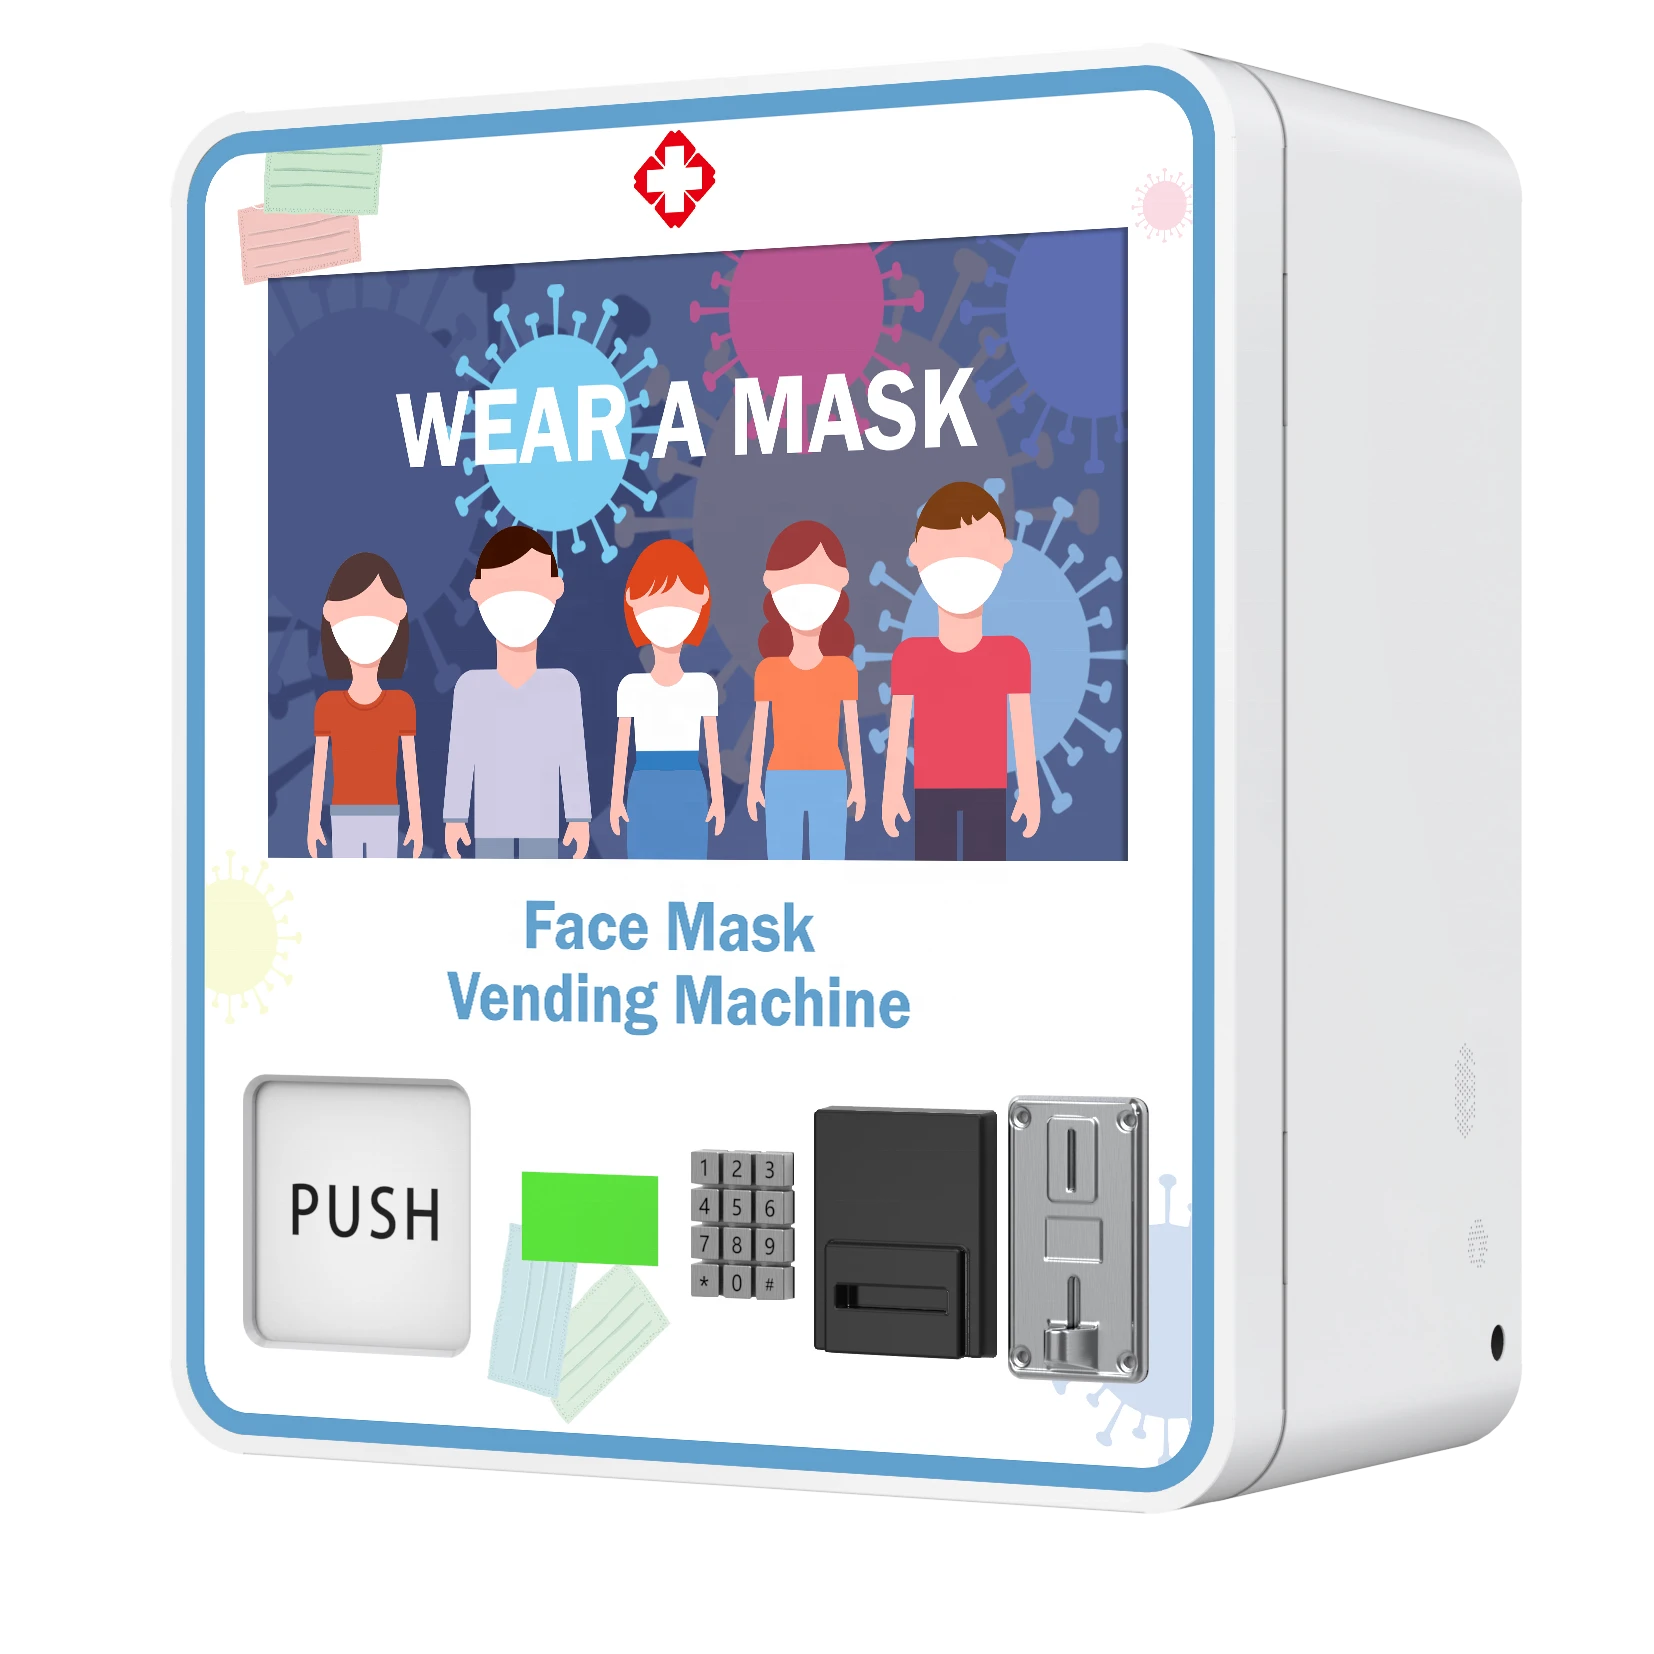 High quality english version wall mounted mini masks vending machine with bill acceptor